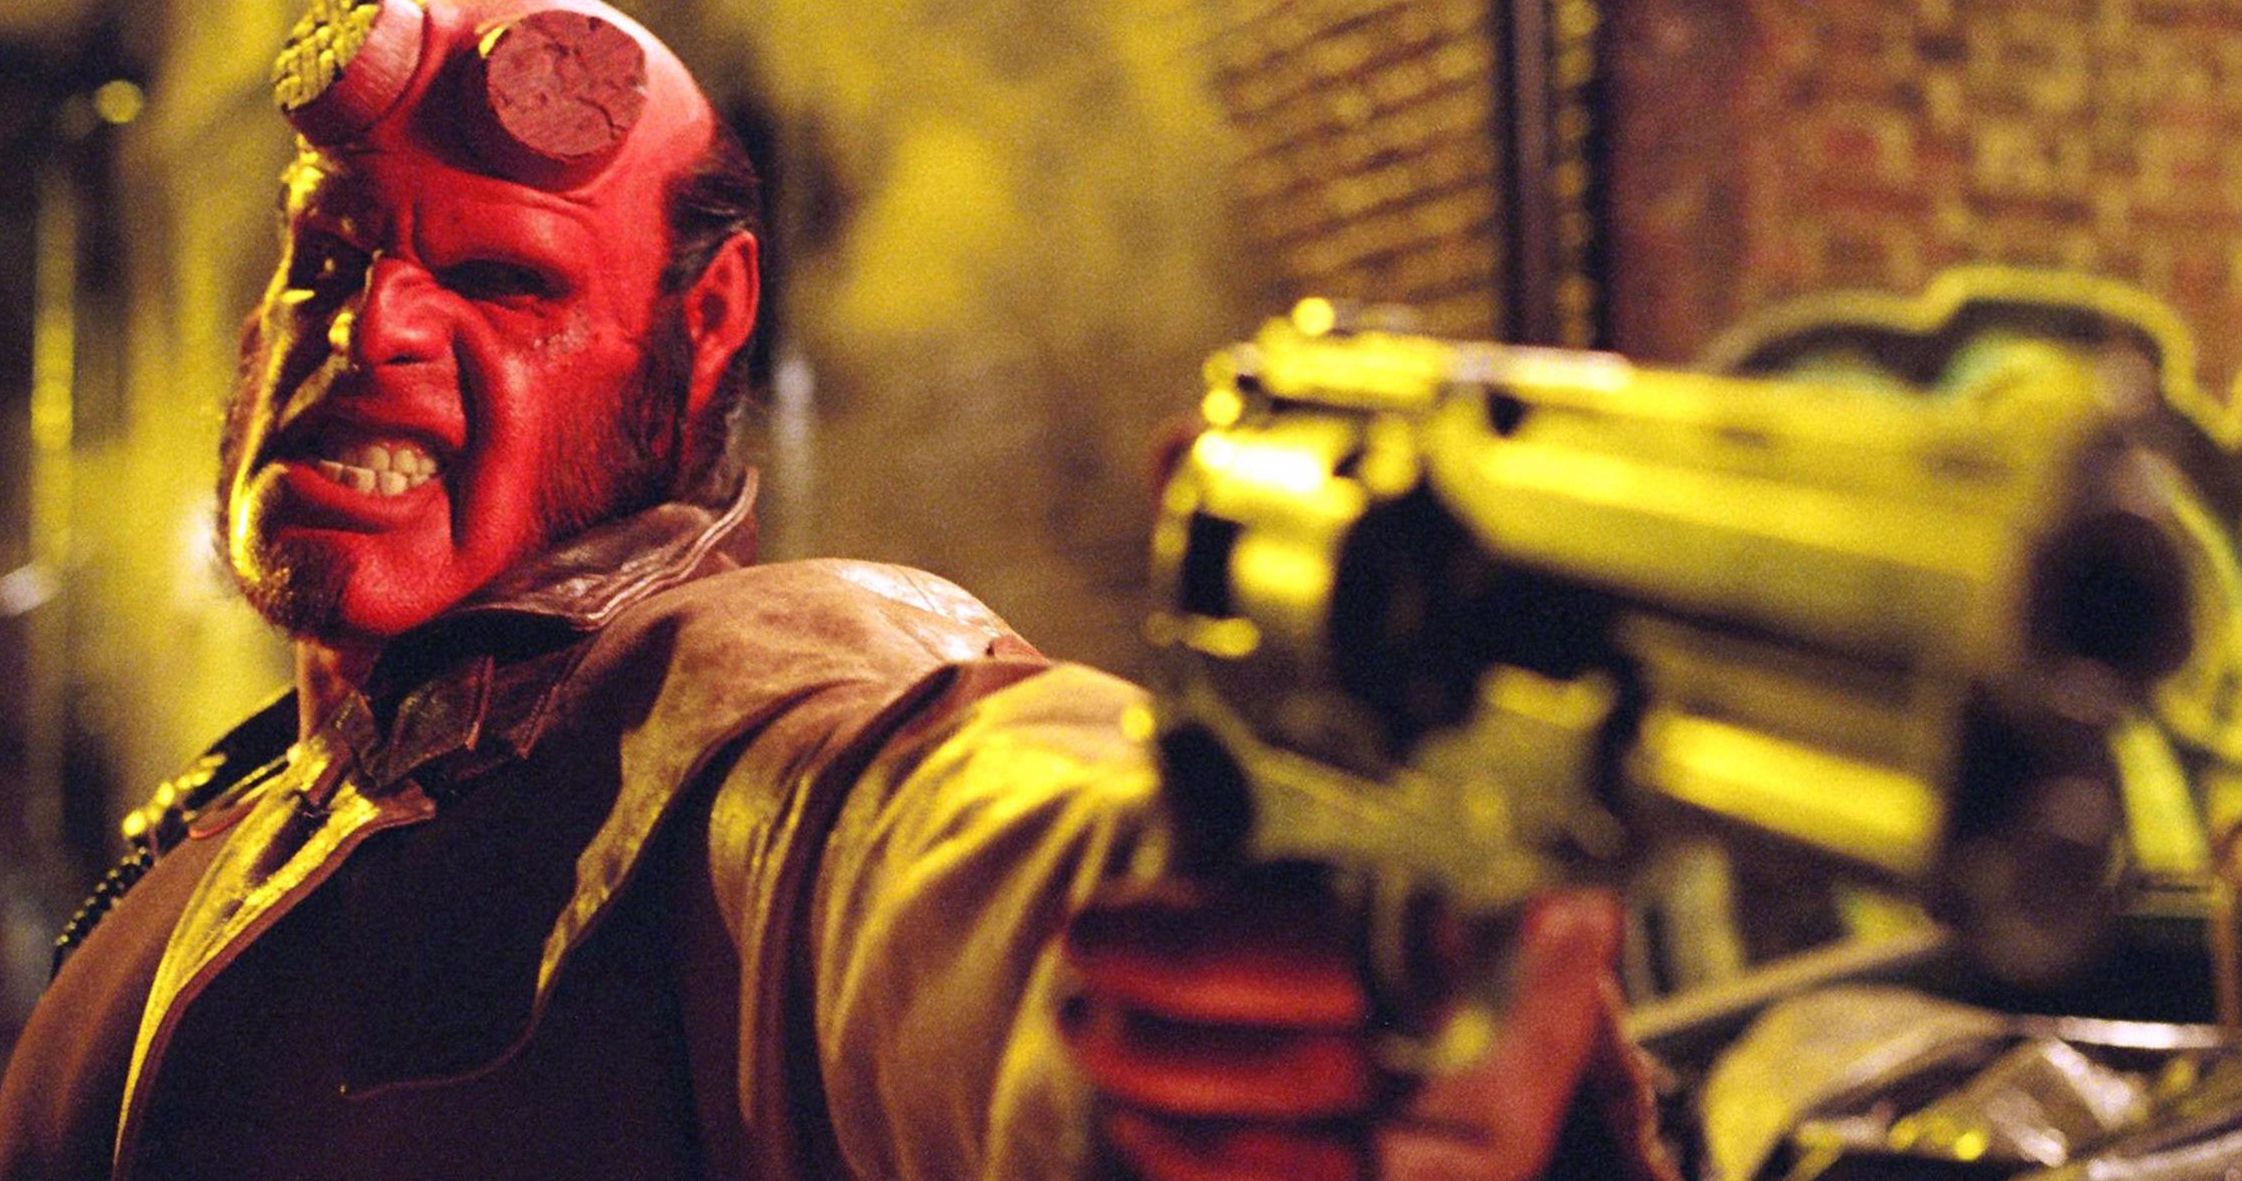 What Allowed the First 2 Hellboy Movies to Exist Is Gone Says Guillermo Del Toro